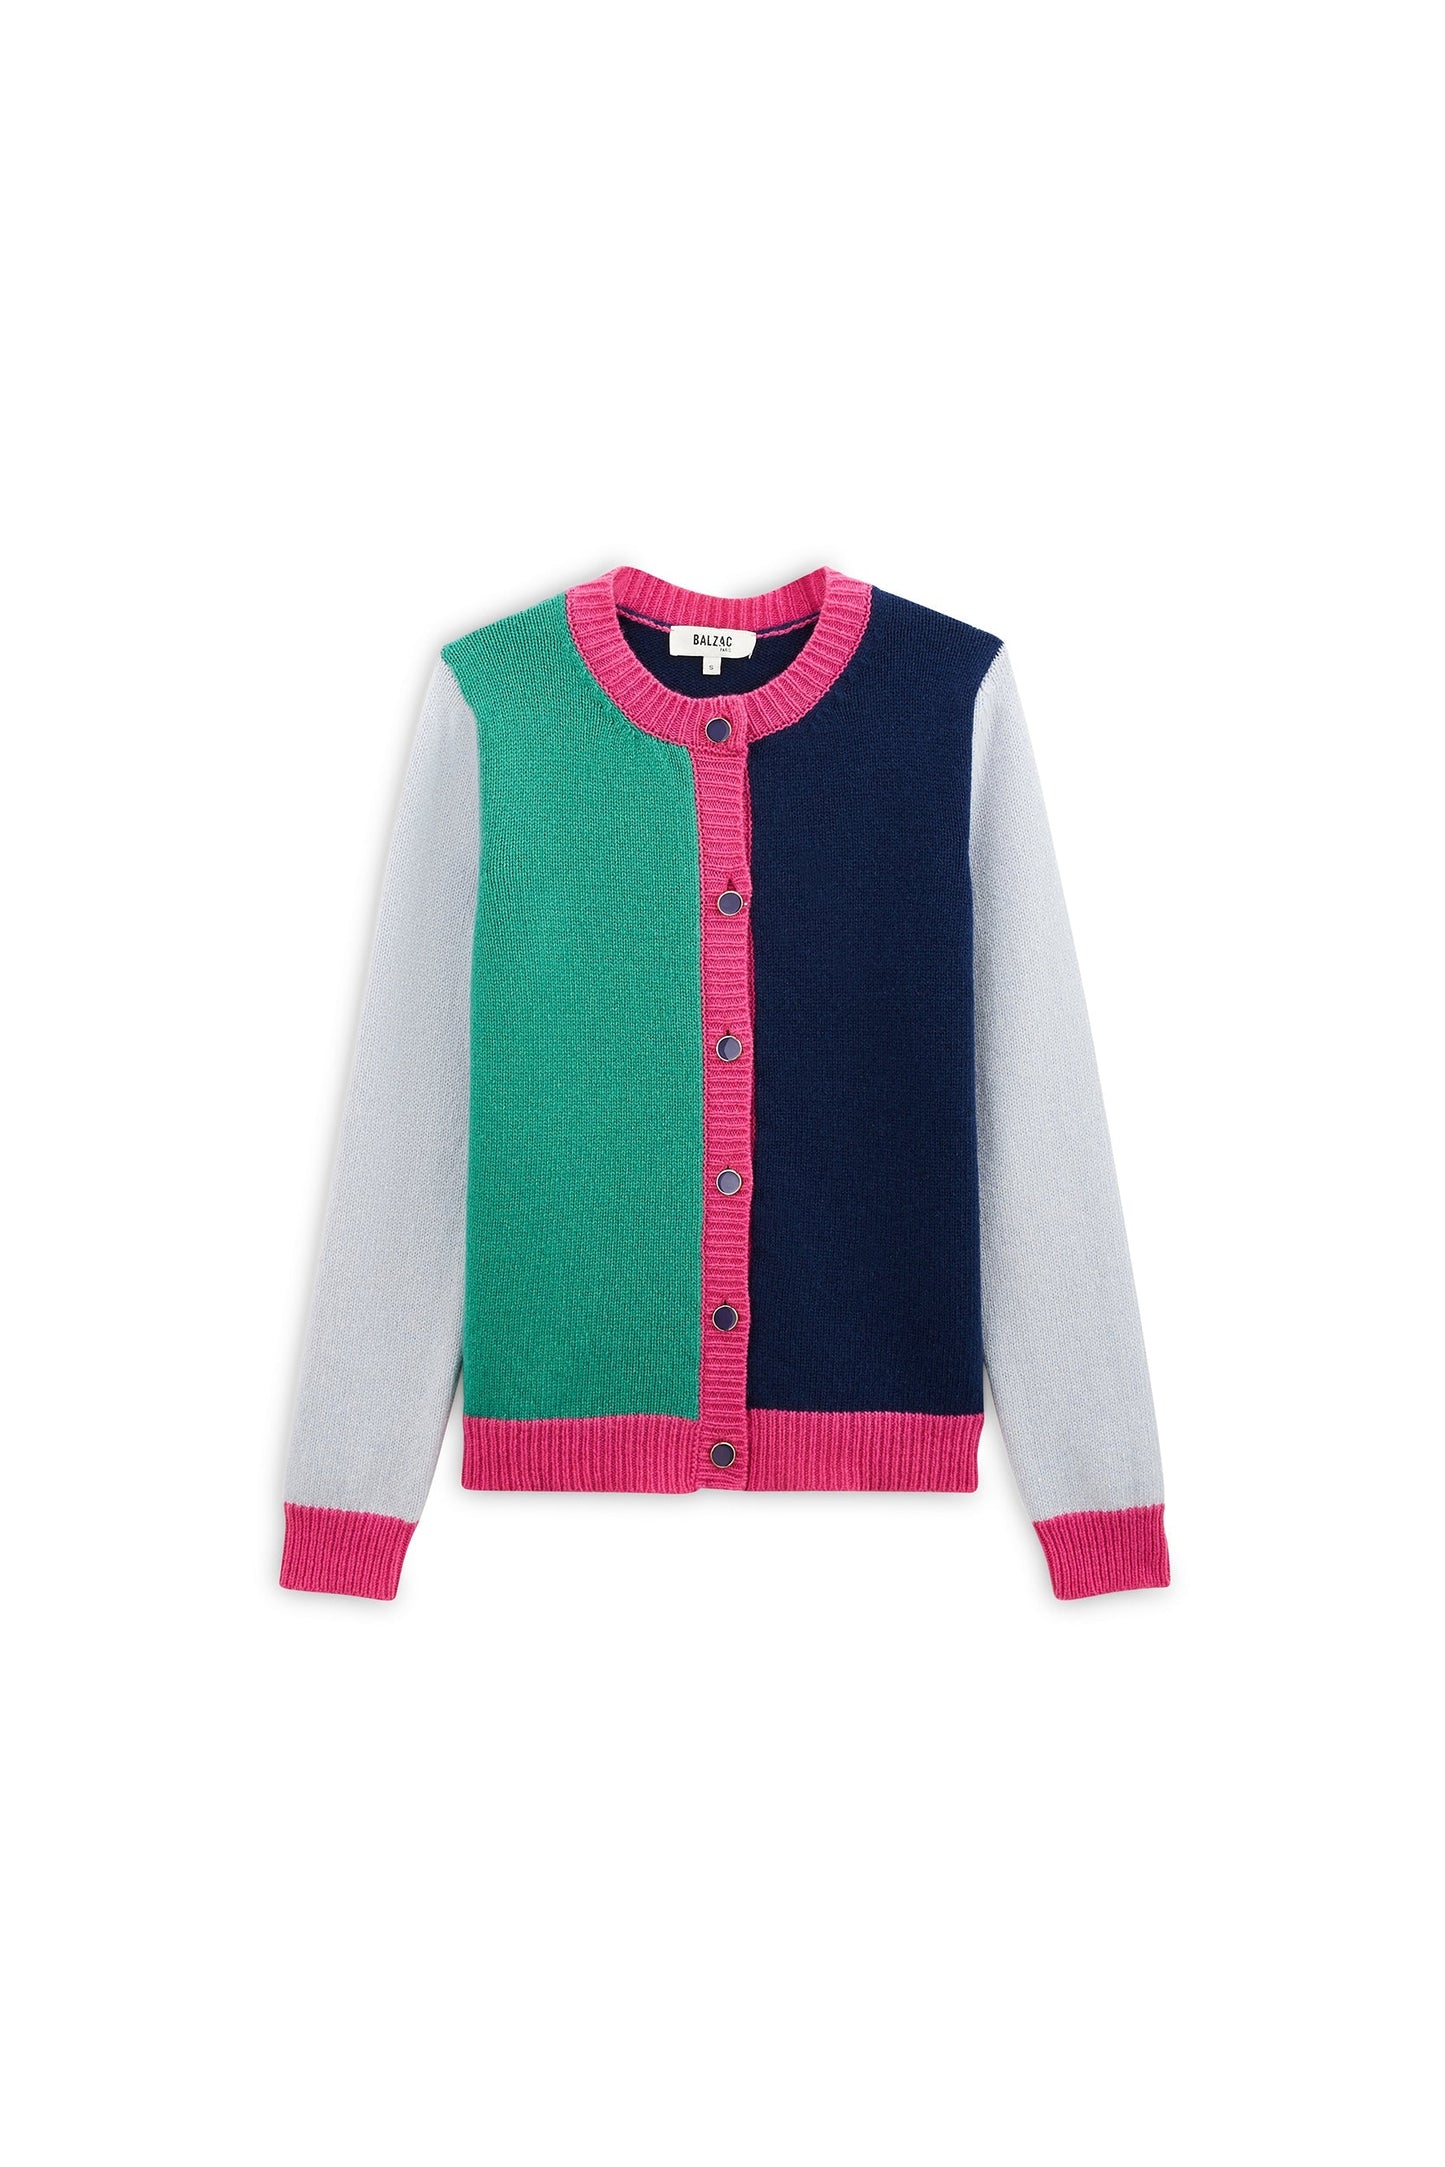 Blue, green and pink Fontaine cardigan